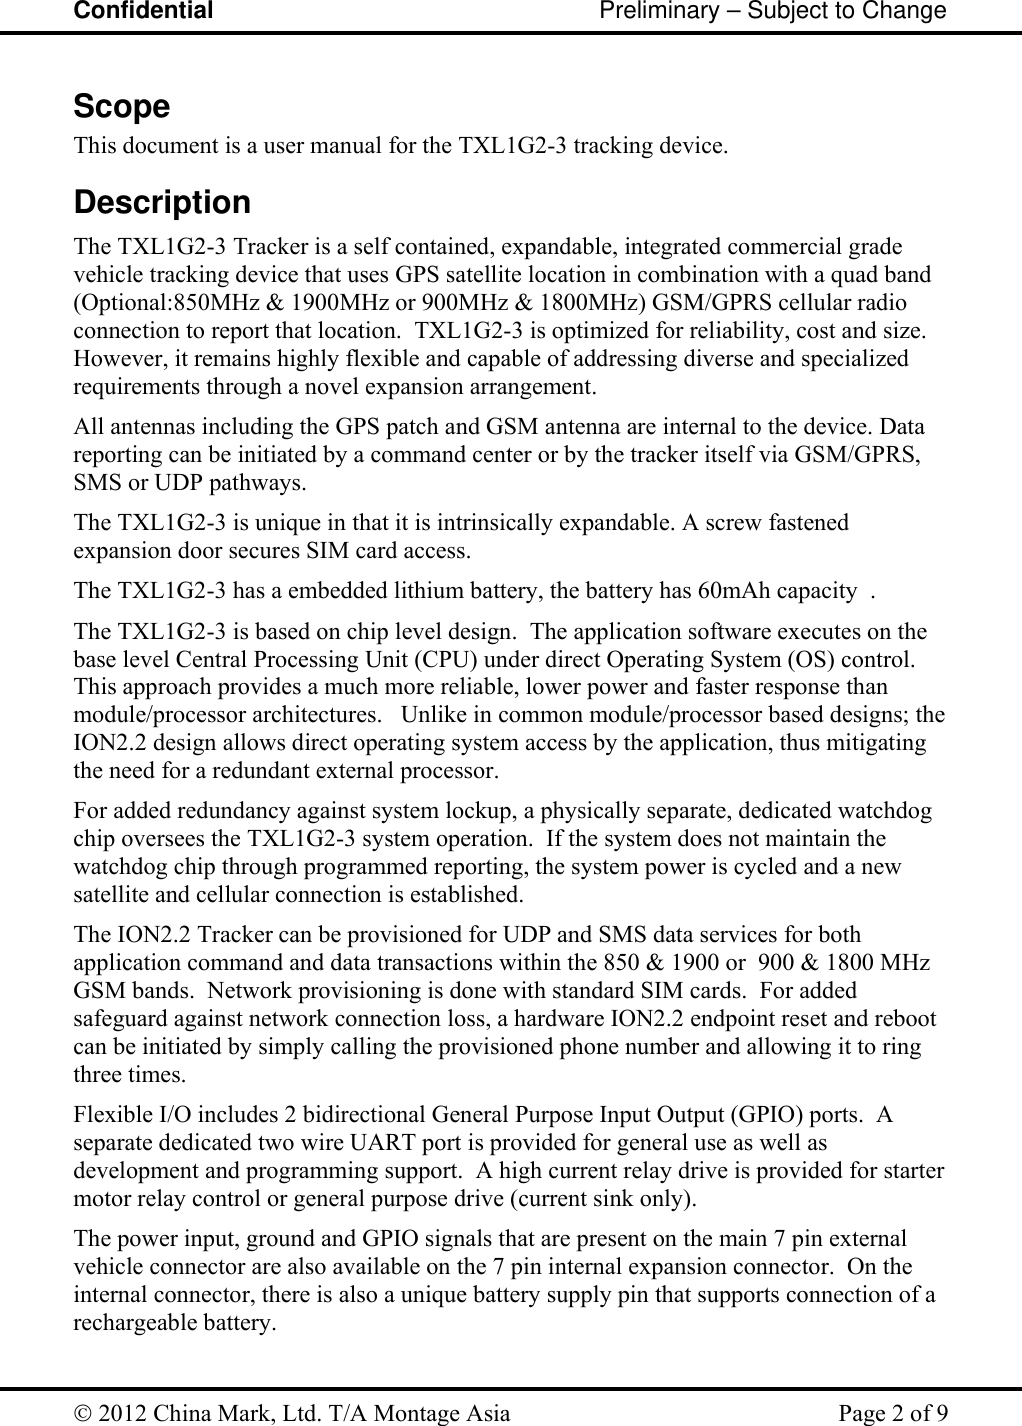 Confidential                                                         Preliminary – Subject to Change   2012 China Mark, Ltd. T/A Montage Asia   Page 2 of 9  Scope This document is a user manual for the TXL1G2-3 tracking device.    Description The TXL1G2-3 Tracker is a self contained, expandable, integrated commercial grade vehicle tracking device that uses GPS satellite location in combination with a quad band (Optional:850MHz &amp; 1900MHz or 900MHz &amp; 1800MHz) GSM/GPRS cellular radio connection to report that location.  TXL1G2-3 is optimized for reliability, cost and size. However, it remains highly flexible and capable of addressing diverse and specialized requirements through a novel expansion arrangement. All antennas including the GPS patch and GSM antenna are internal to the device. Data reporting can be initiated by a command center or by the tracker itself via GSM/GPRS, SMS or UDP pathways.   The TXL1G2-3 is unique in that it is intrinsically expandable. A screw fastened expansion door secures SIM card access.  The TXL1G2-3 has a embedded lithium battery, the battery has 60mAh capacity  . The TXL1G2-3 is based on chip level design.  The application software executes on the base level Central Processing Unit (CPU) under direct Operating System (OS) control.  This approach provides a much more reliable, lower power and faster response than module/processor architectures.   Unlike in common module/processor based designs; the ION2.2 design allows direct operating system access by the application, thus mitigating the need for a redundant external processor. For added redundancy against system lockup, a physically separate, dedicated watchdog chip oversees the TXL1G2-3 system operation.  If the system does not maintain the watchdog chip through programmed reporting, the system power is cycled and a new satellite and cellular connection is established.   The ION2.2 Tracker can be provisioned for UDP and SMS data services for both application command and data transactions within the 850 &amp; 1900 or  900 &amp; 1800 MHz GSM bands.  Network provisioning is done with standard SIM cards.  For added safeguard against network connection loss, a hardware ION2.2 endpoint reset and reboot can be initiated by simply calling the provisioned phone number and allowing it to ring three times. Flexible I/O includes 2 bidirectional General Purpose Input Output (GPIO) ports.  A separate dedicated two wire UART port is provided for general use as well as development and programming support.  A high current relay drive is provided for starter motor relay control or general purpose drive (current sink only).     The power input, ground and GPIO signals that are present on the main 7 pin external vehicle connector are also available on the 7 pin internal expansion connector.  On the internal connector, there is also a unique battery supply pin that supports connection of a rechargeable battery. 